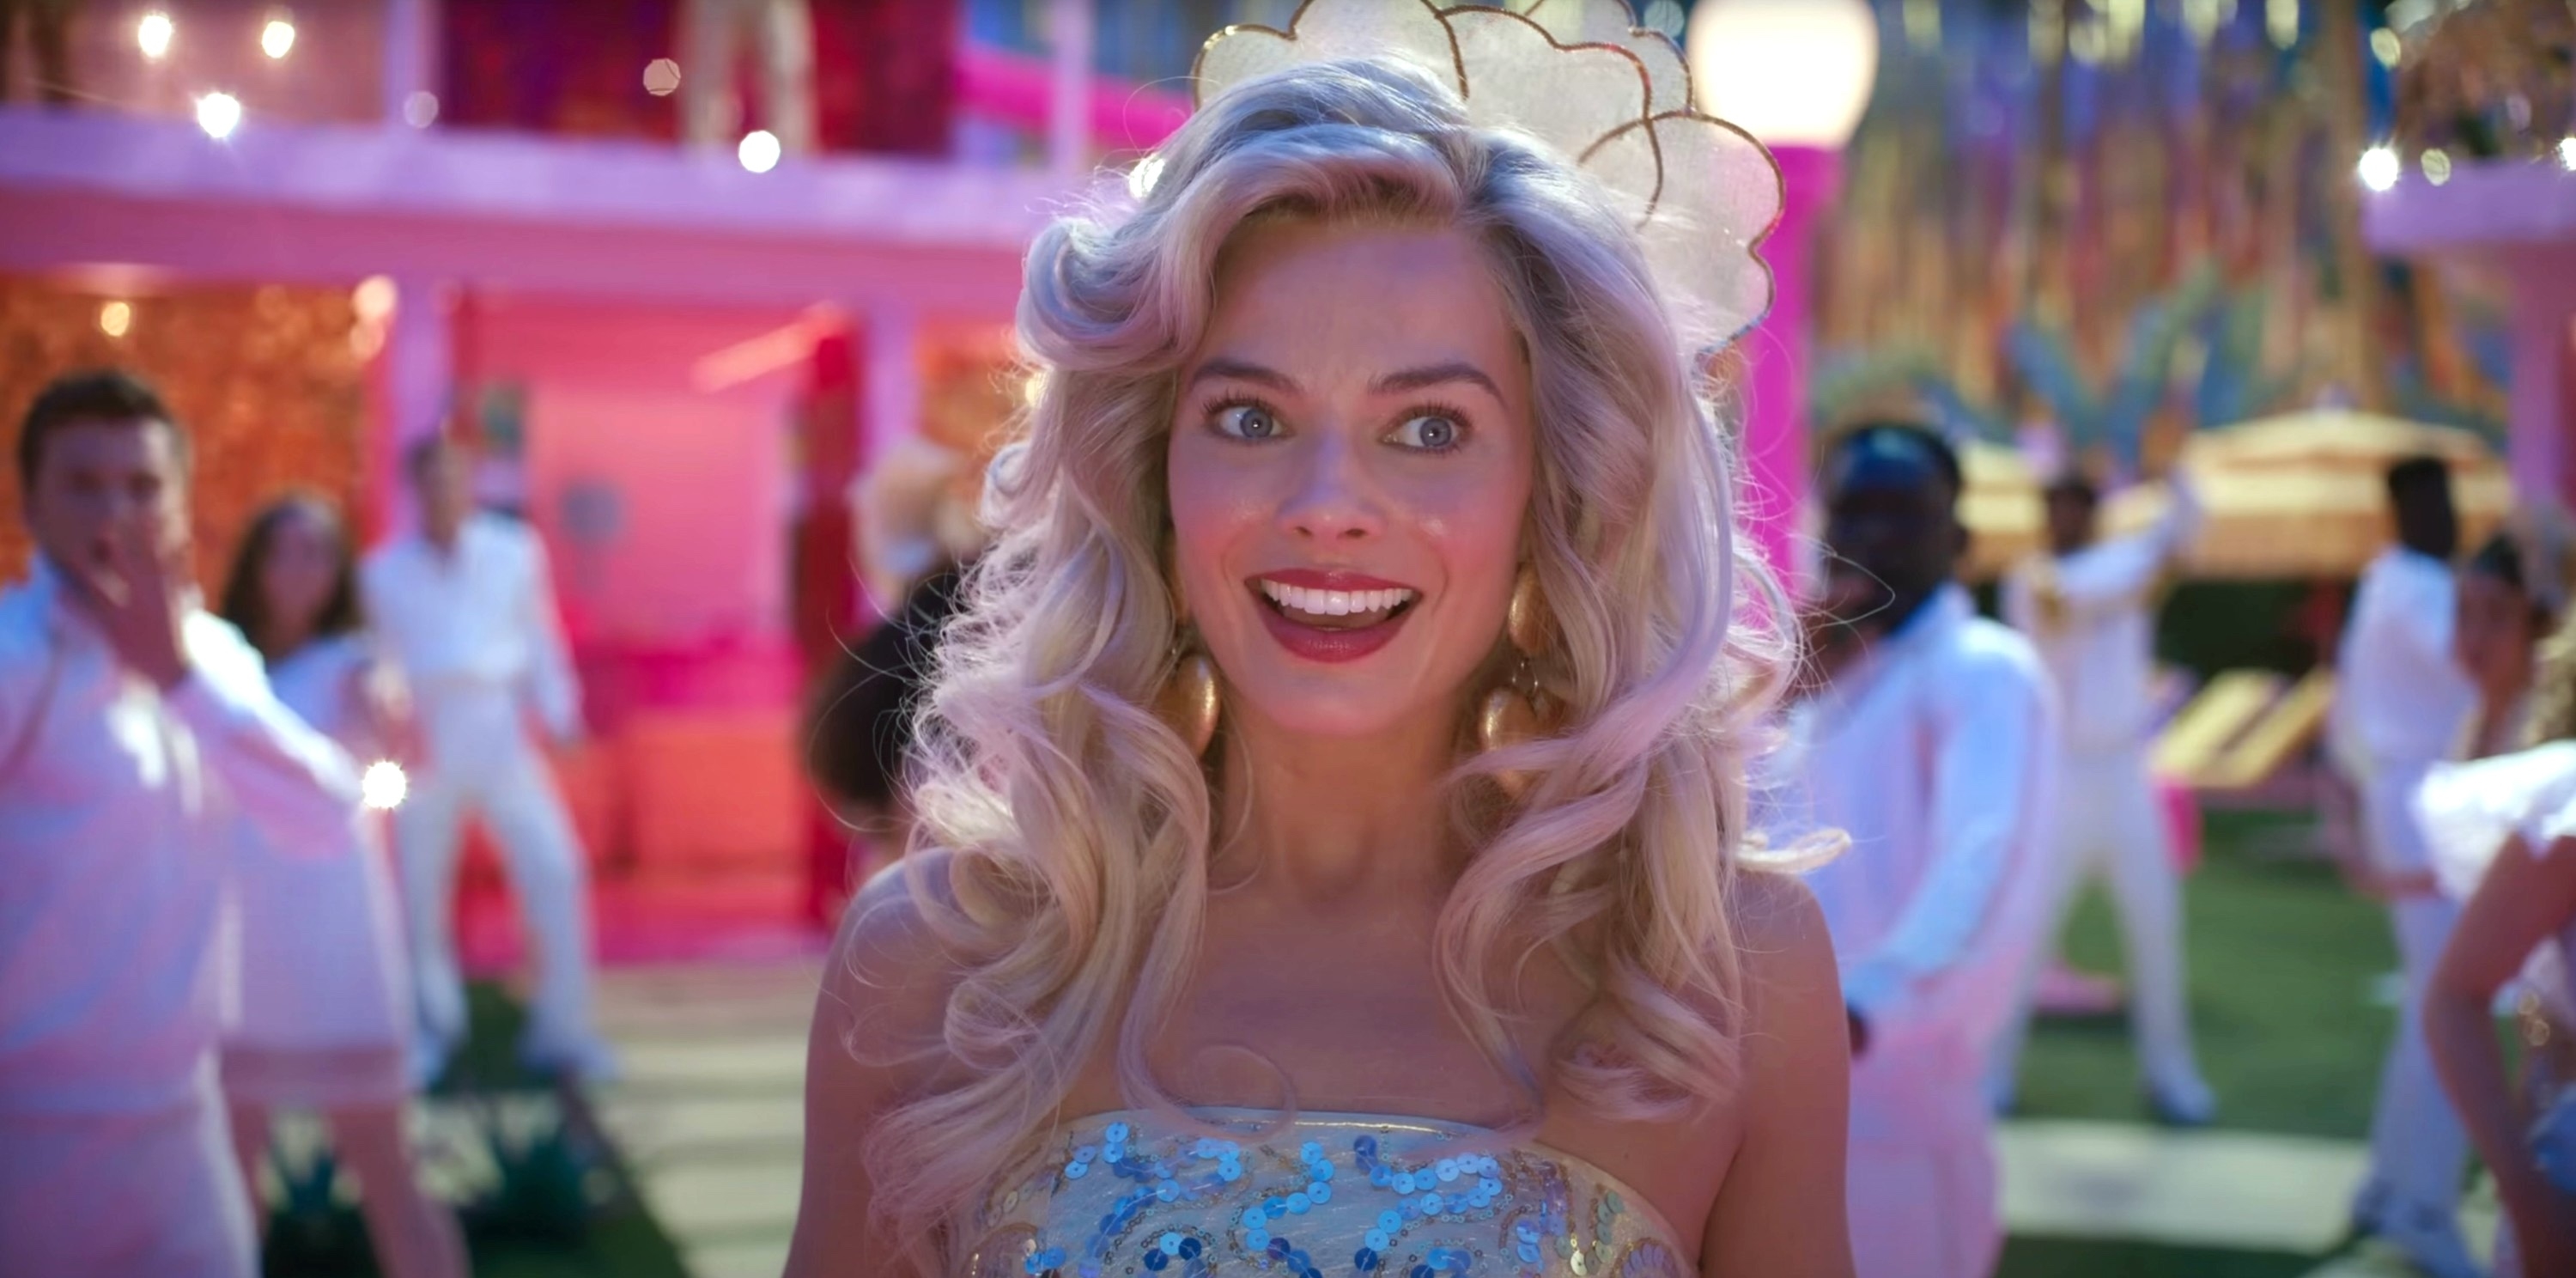 Animated character Barbie from a film wearing a sparkling dress and tiara, with a joyful expression in a party scene